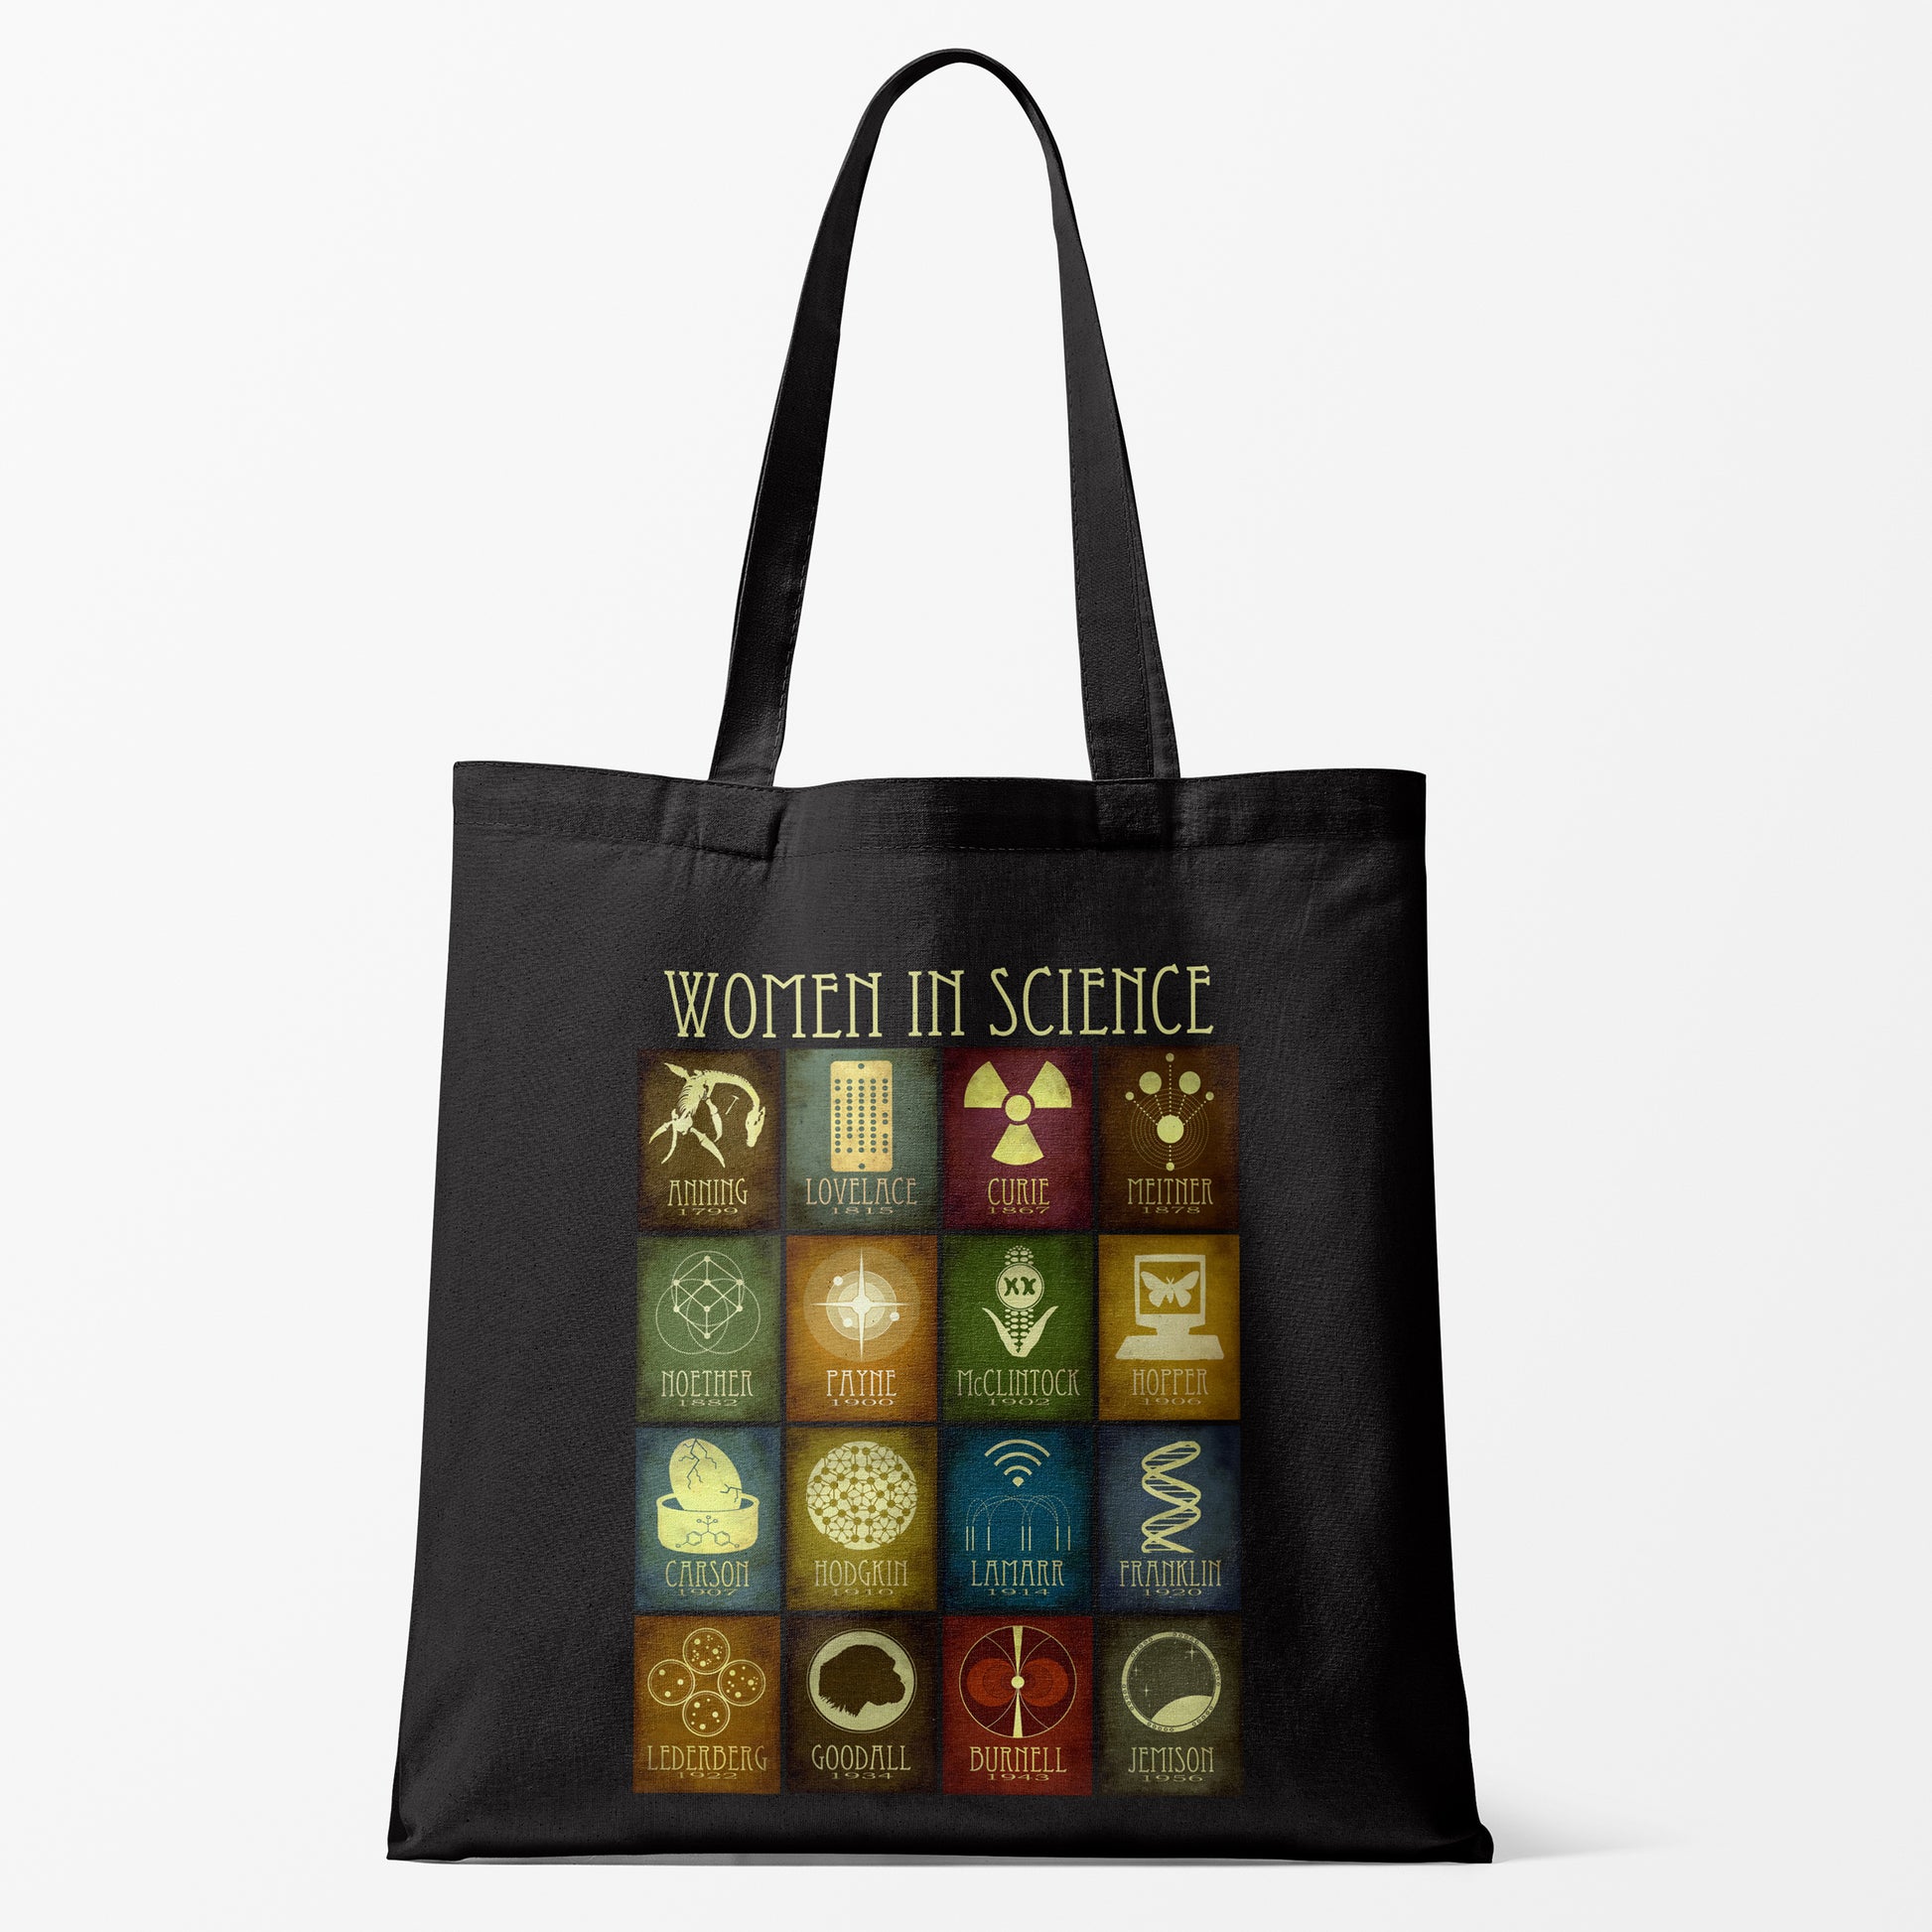 Women in Science reusable canvas cotton tote bag with a colorful artistic mosaic of designs honoring 16 Women in STEM